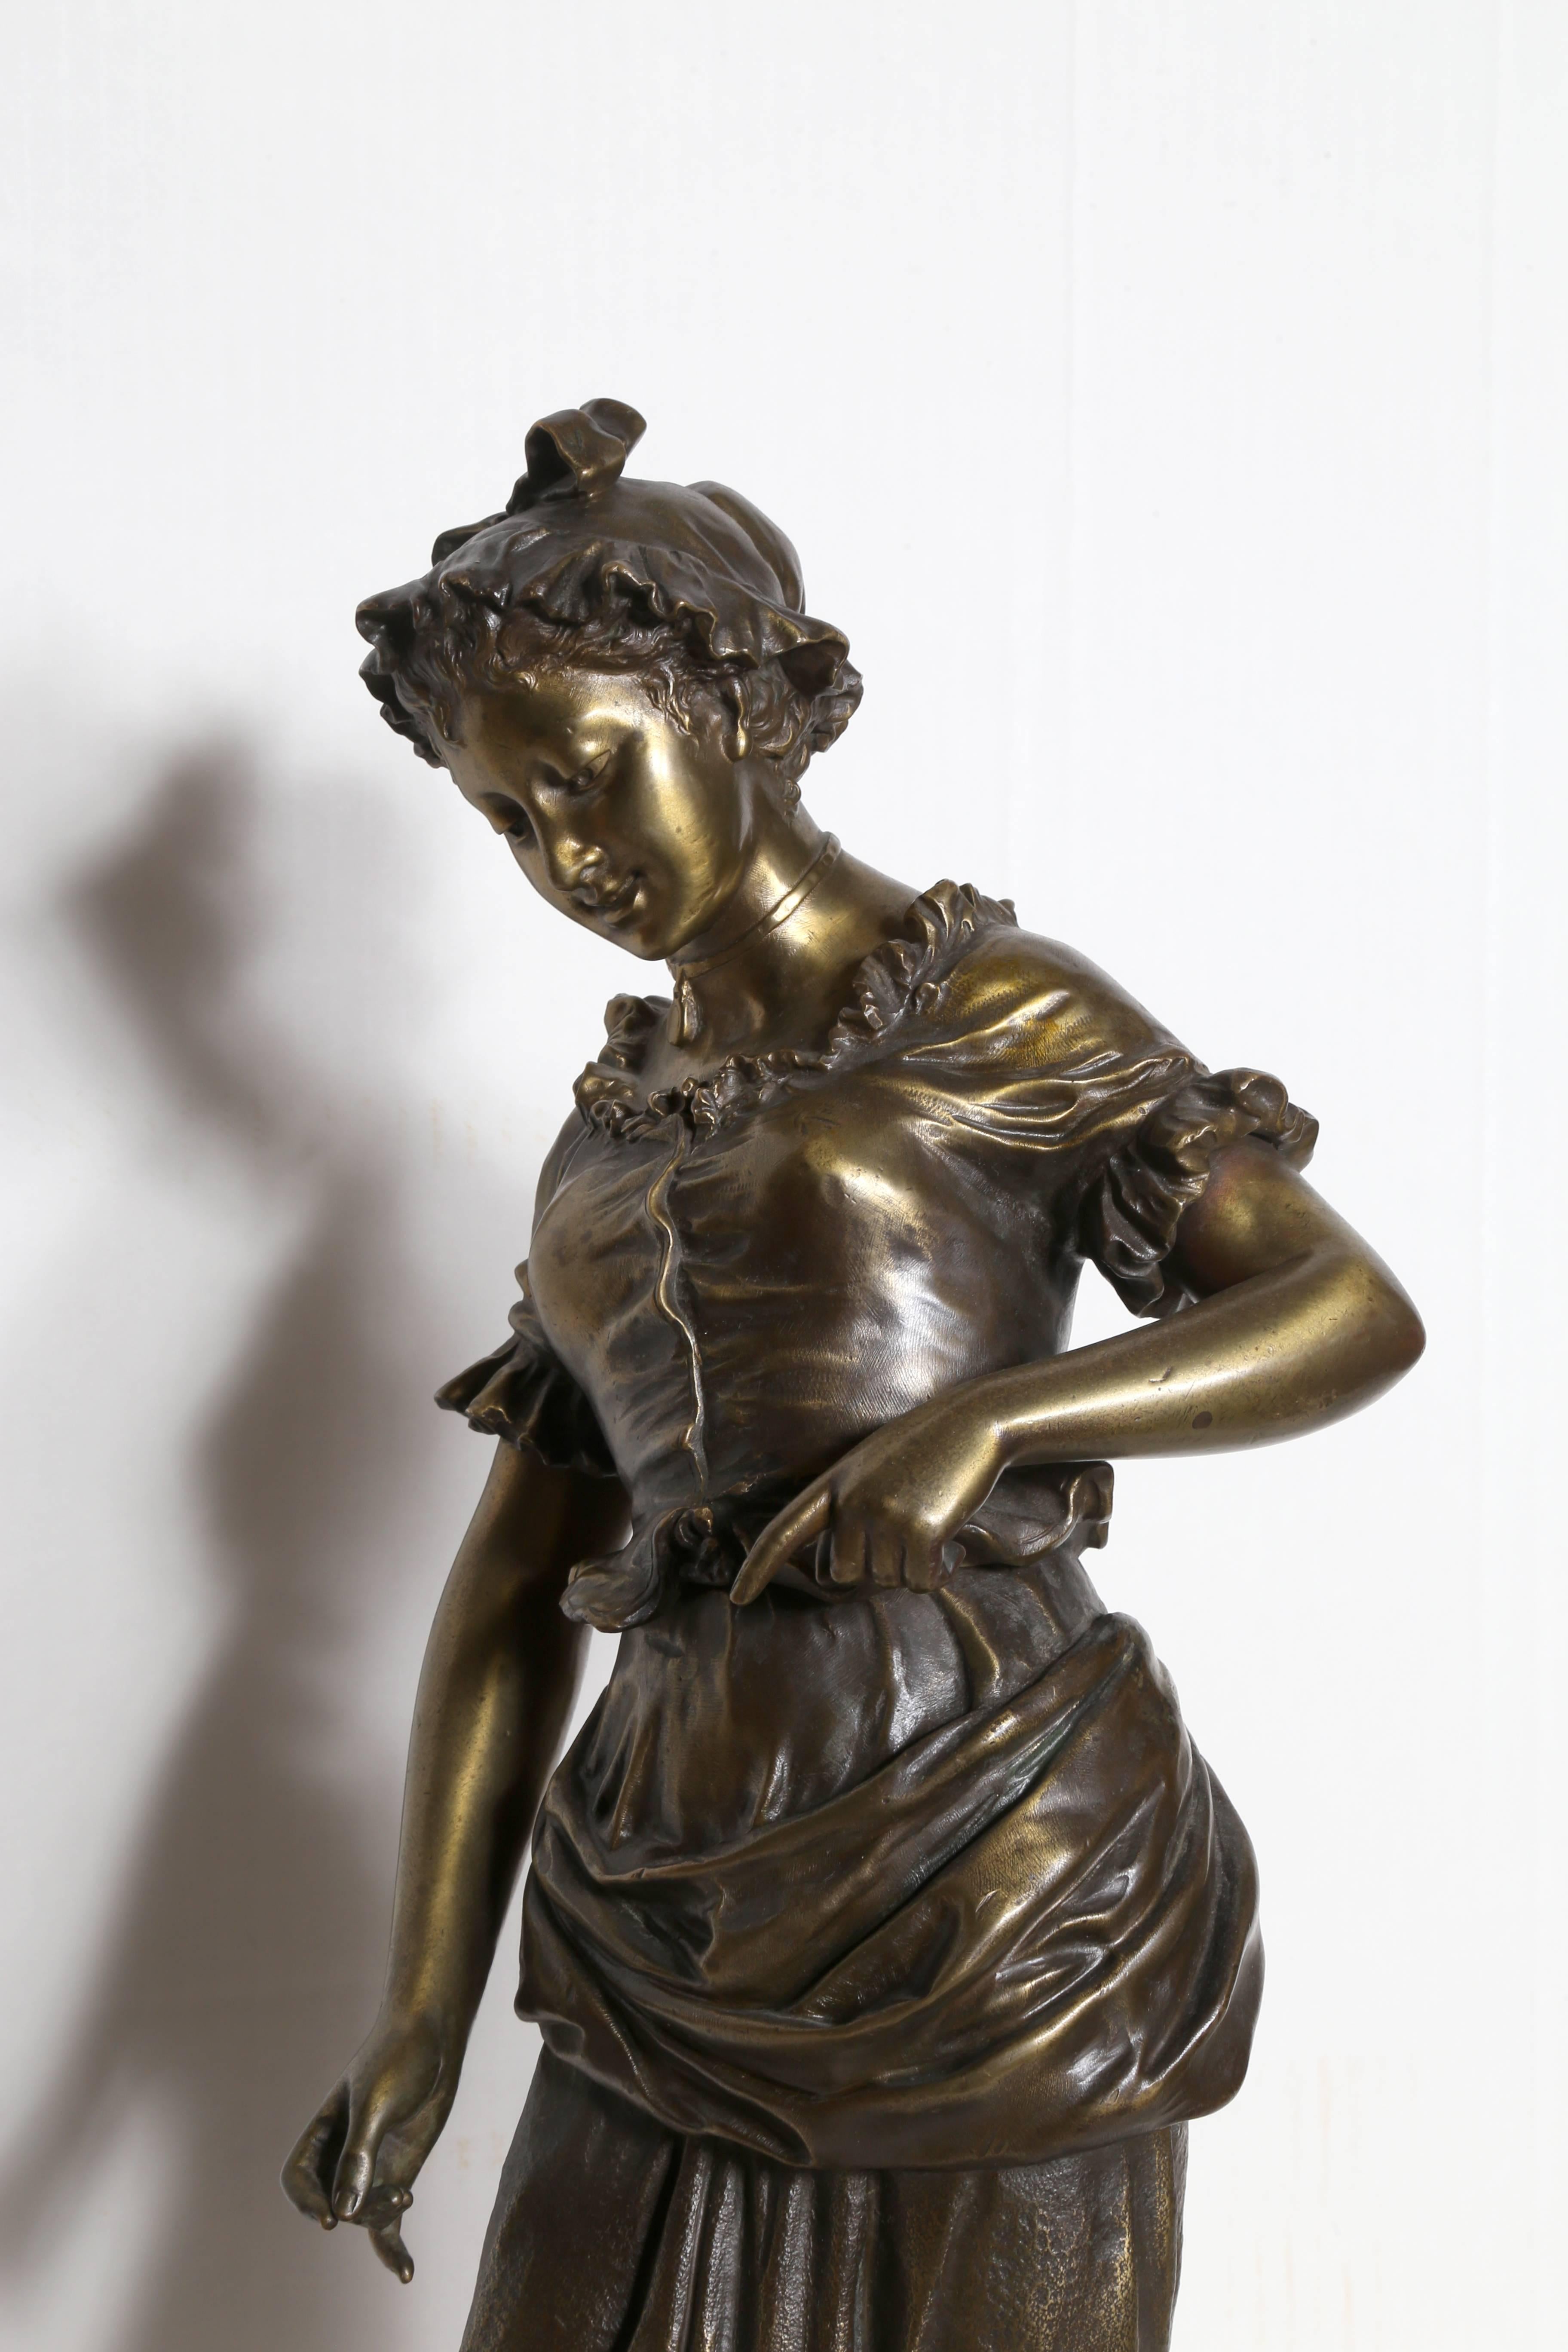 
Artist: Hippolyte Moreau, French (1832 - 1927)
Title: Maiden
Medium: Bronze Sculpture with Marble Base
Size:  22  x 9.5  x 6 in. (55.88  x 24.13  x 15.24 cm)